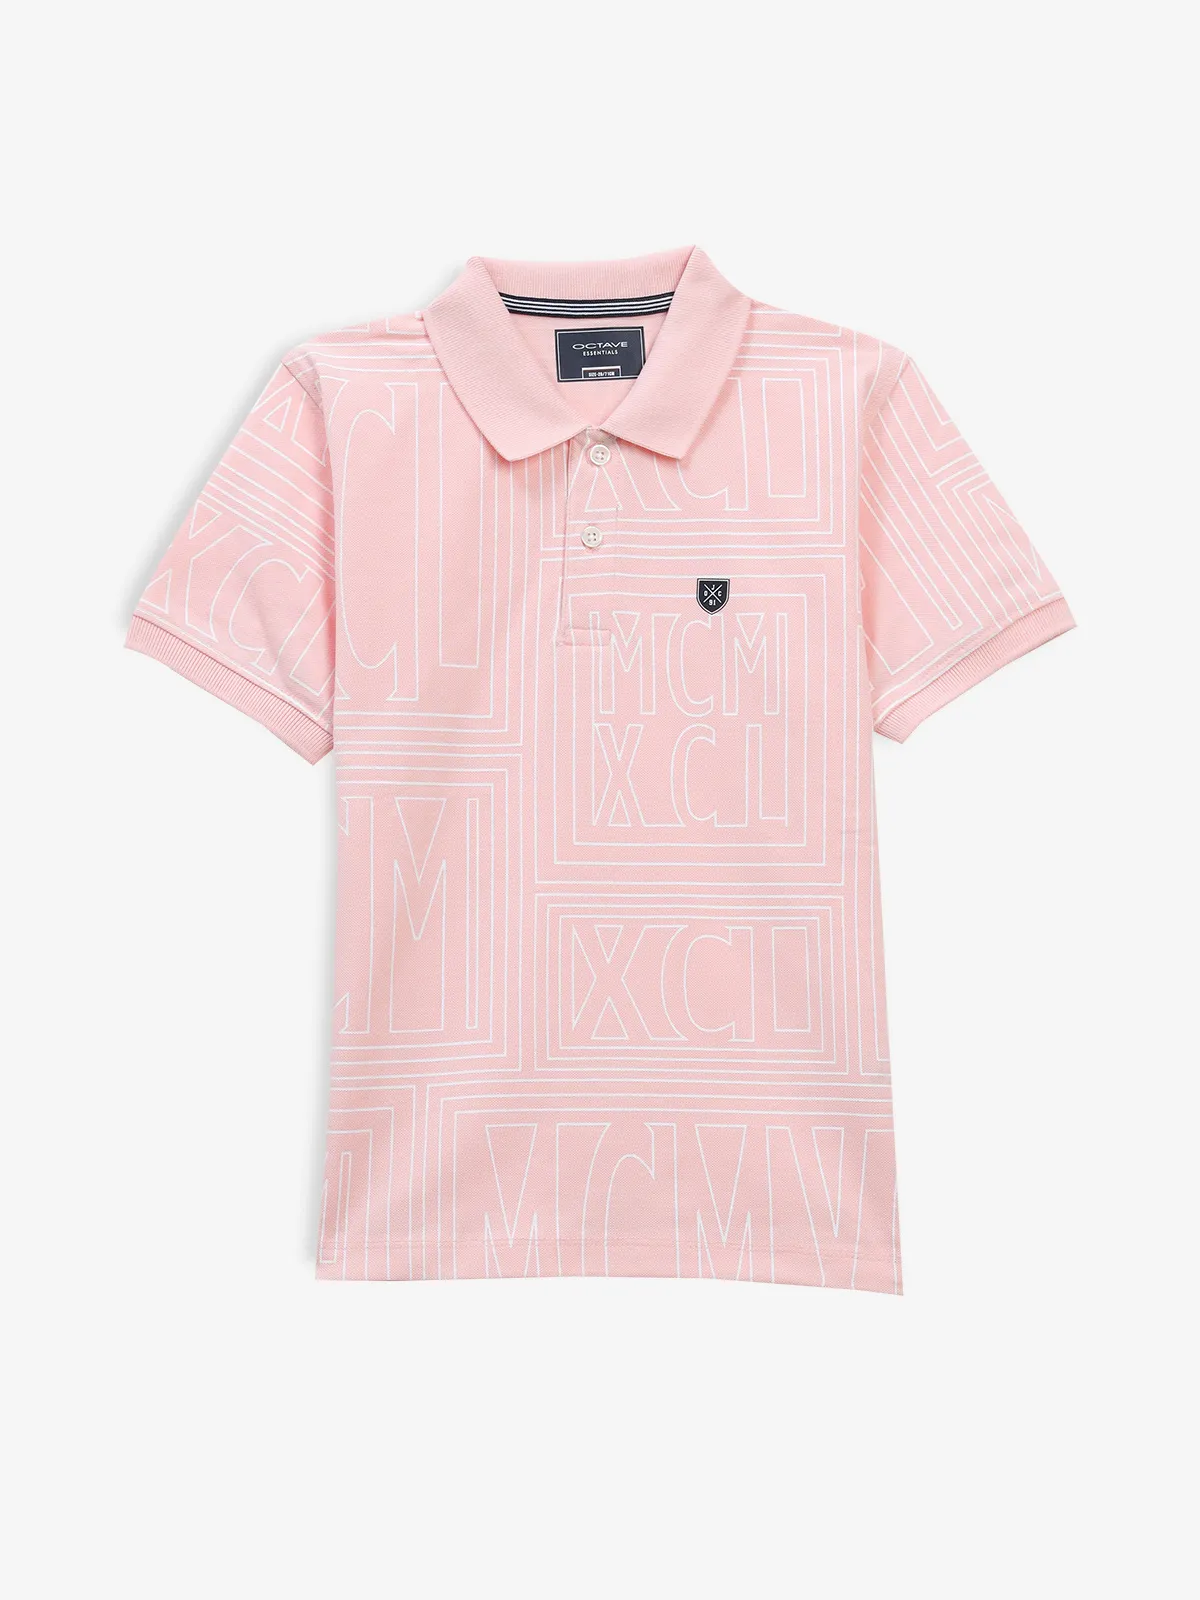 OCTAVE light pink printed casual t-shirt